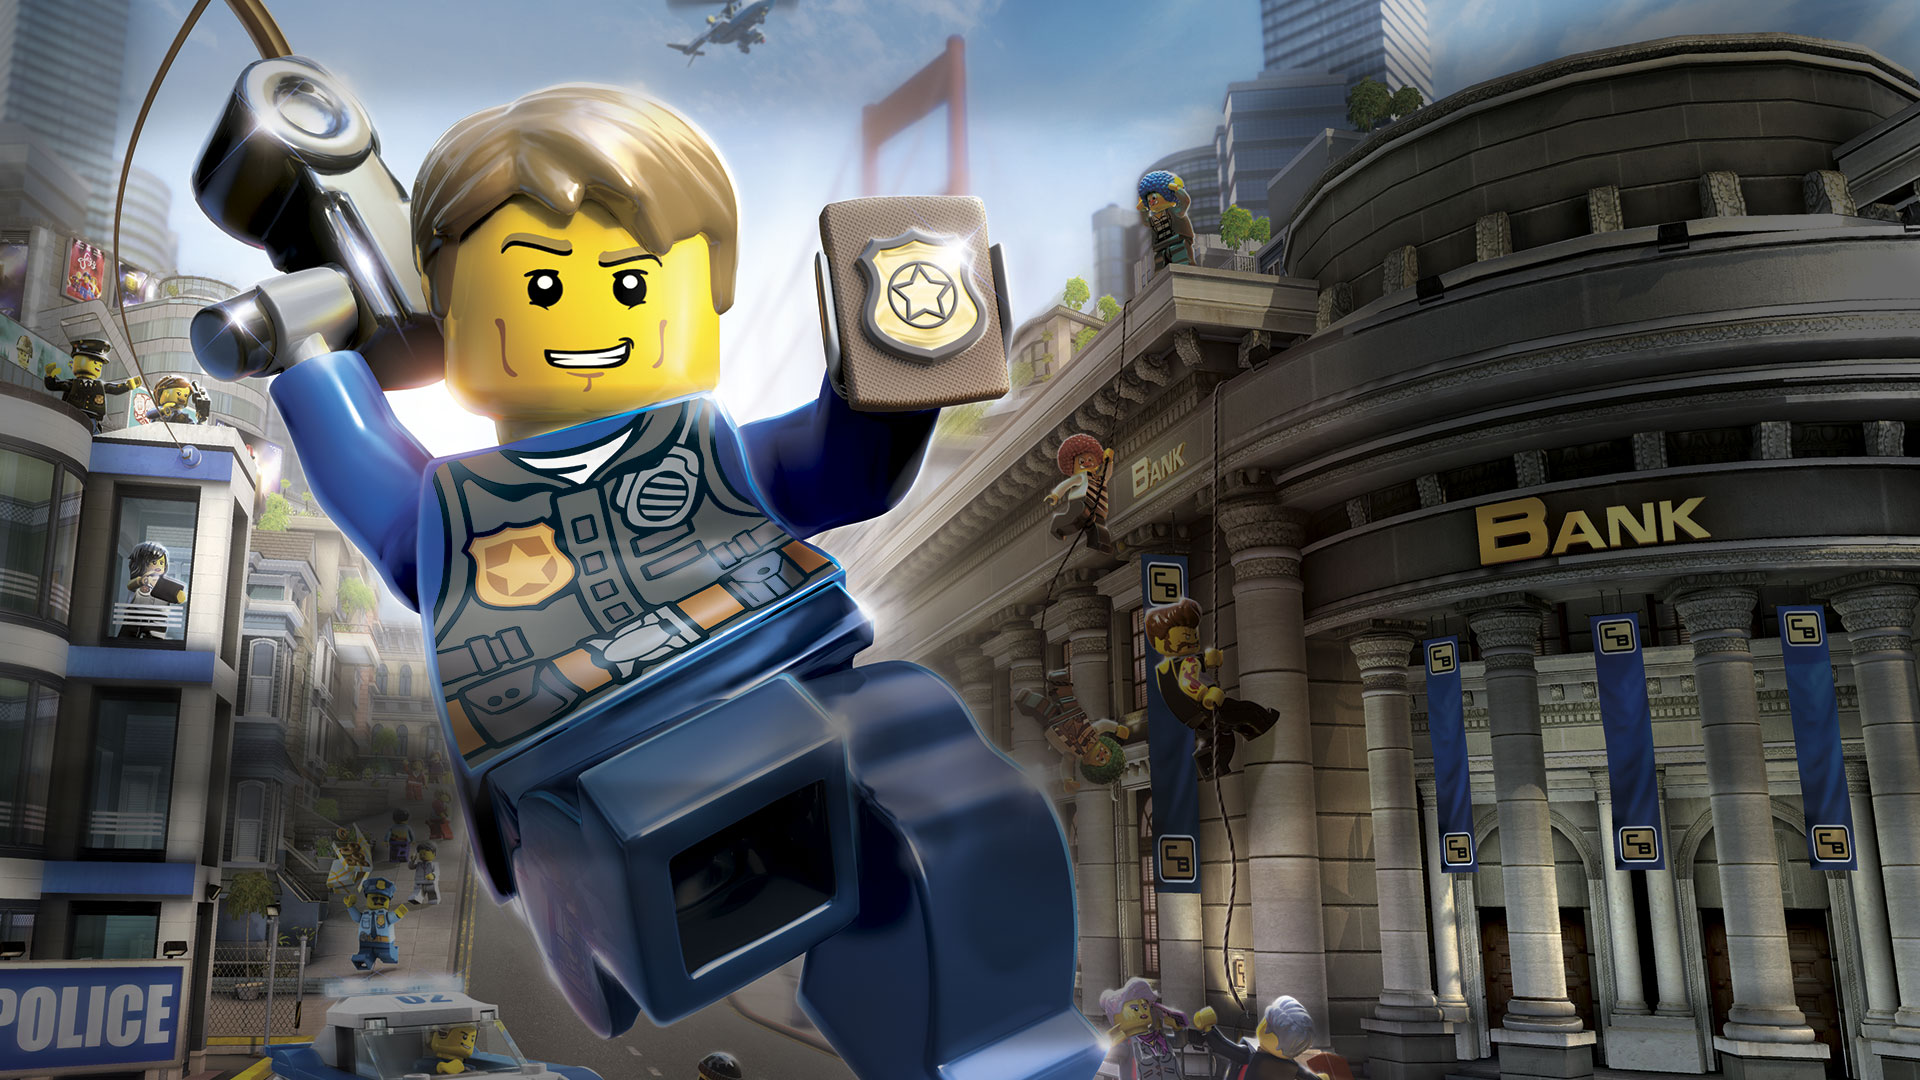 Lego City Undercover Wallpapers - Wallpaper Cave